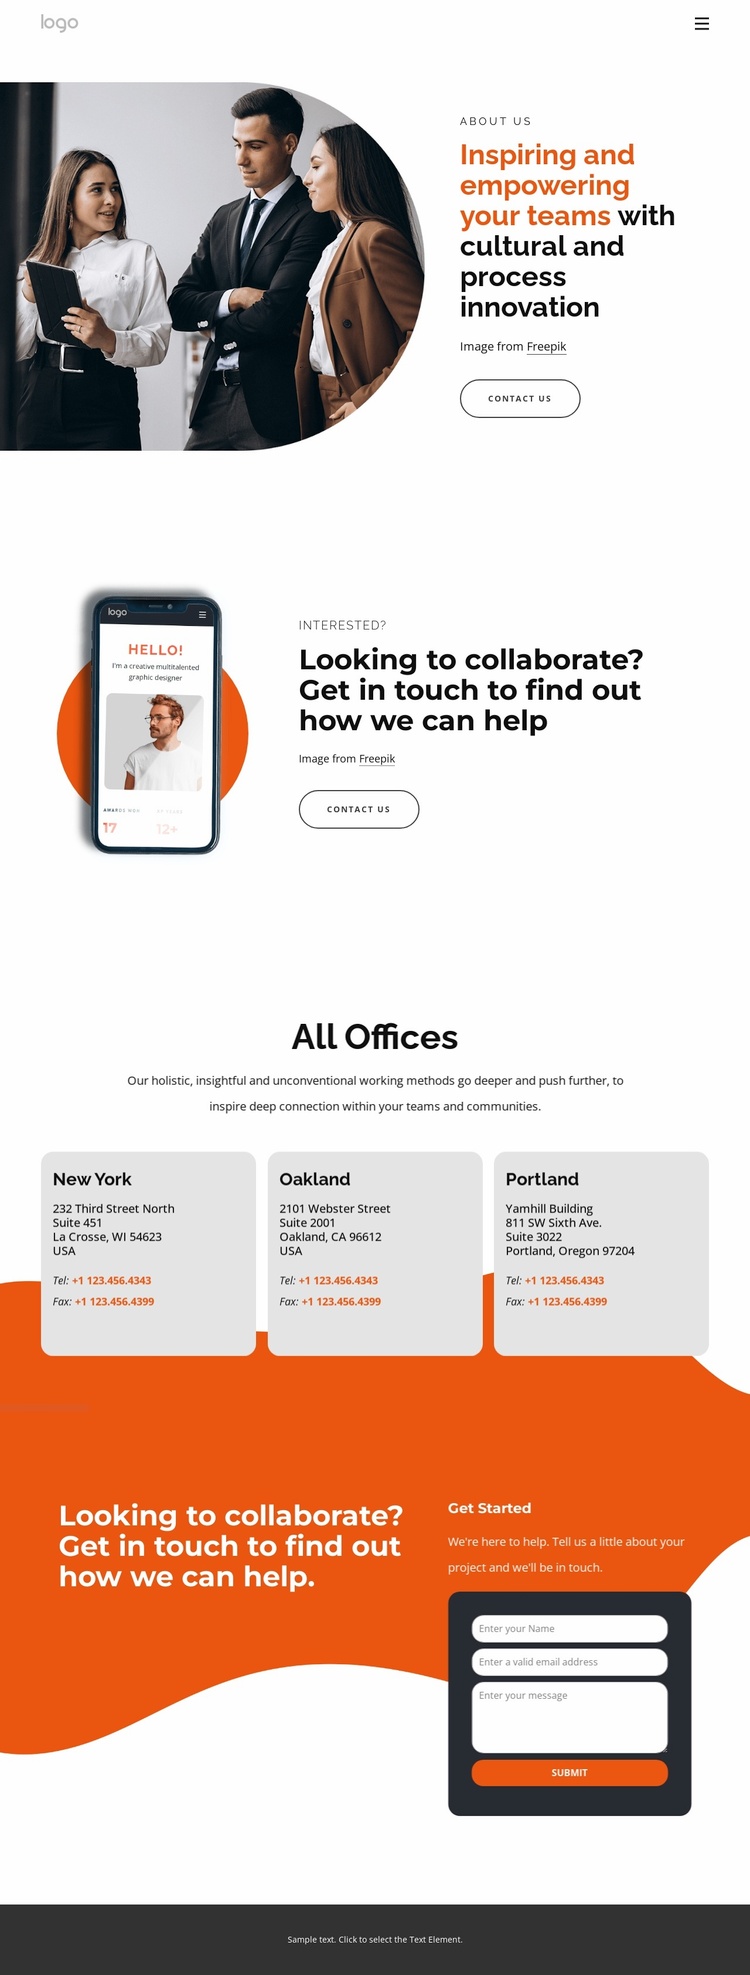 Product-based strategic solutions Website Template